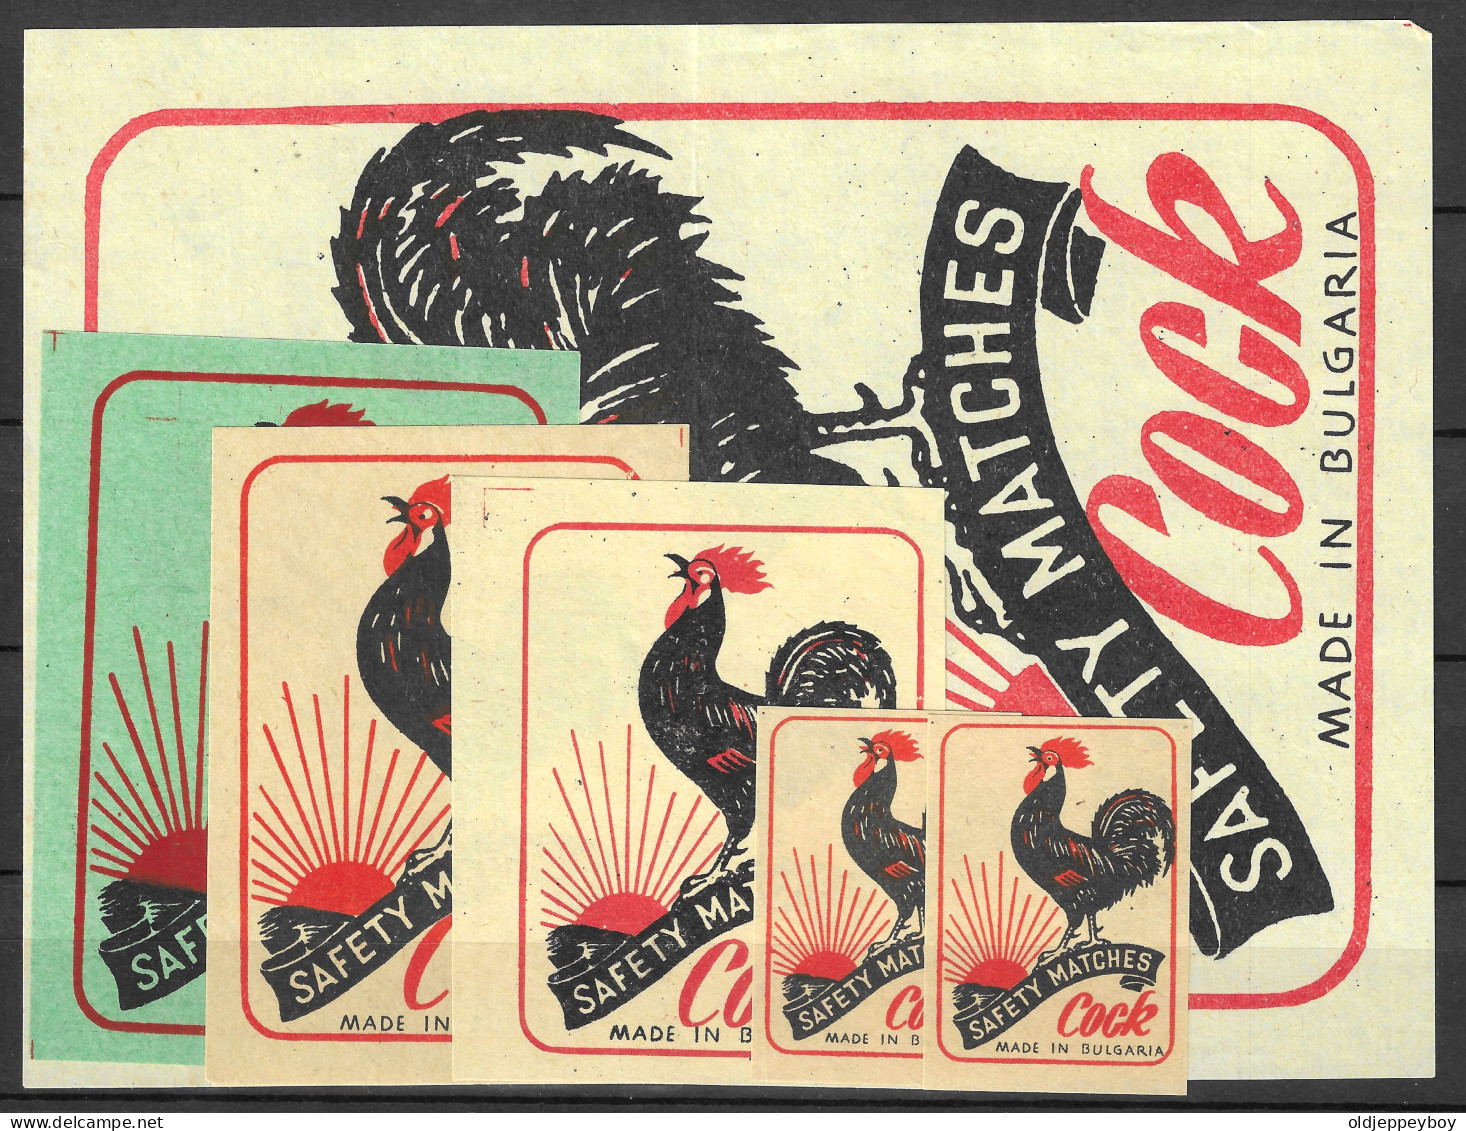  MADE IN BULGARIA MATCHBOX LABEL "COCK "  FULL SET OF 6 DIF SIZES SEE SCAN FOR SIZES EXTRA  LARGE RARE - Boites D'allumettes - Etiquettes